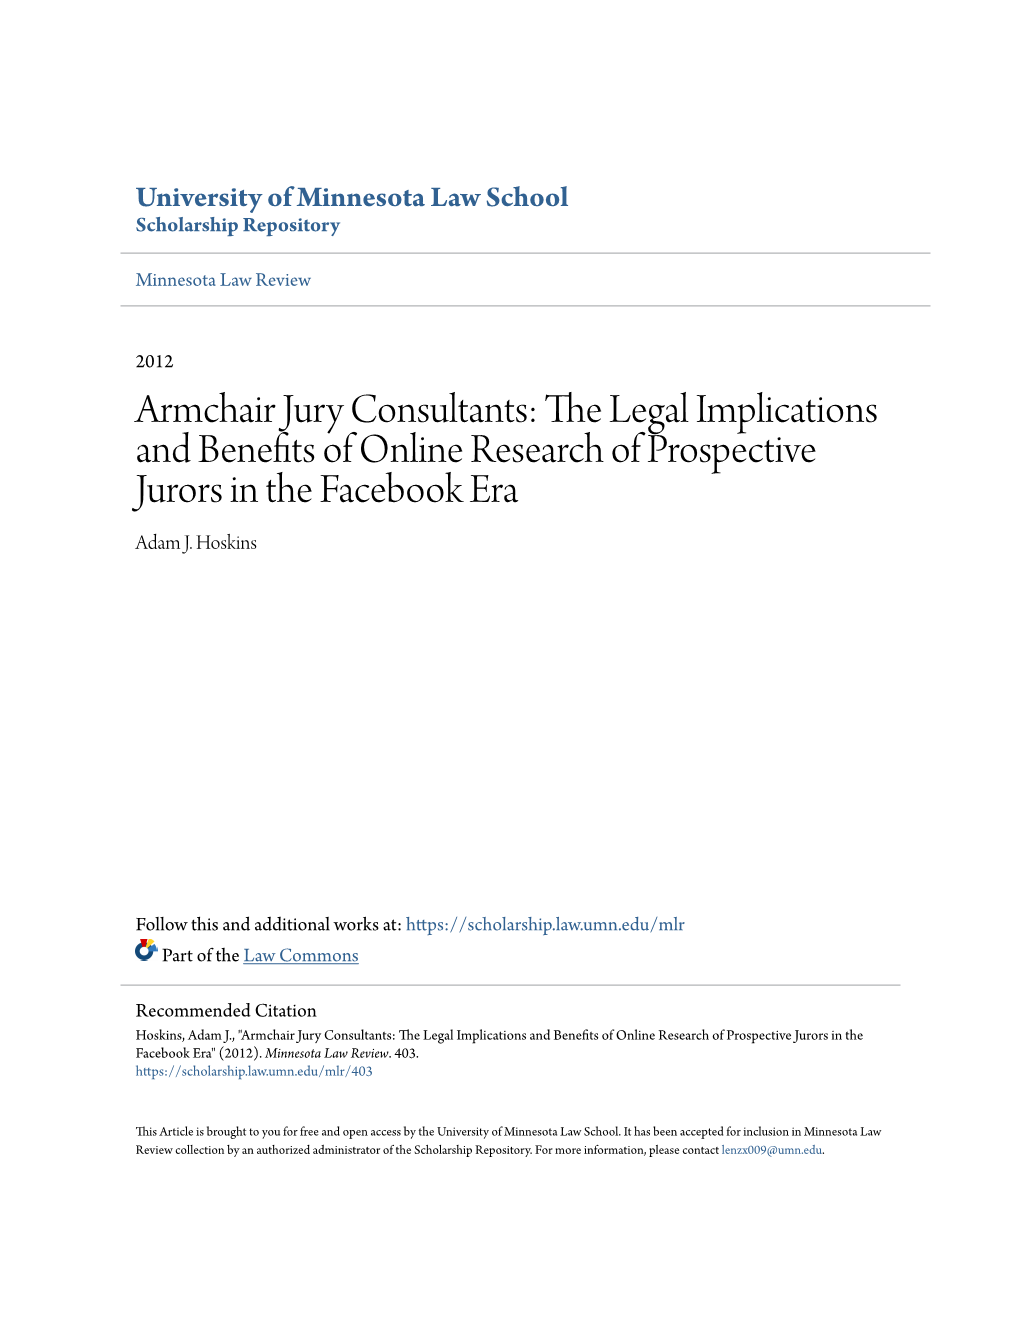 Armchair Jury Consultants: the Legal Implications and Benefits of Online Research of Prospective Jurors in the Facebook Era Adam J